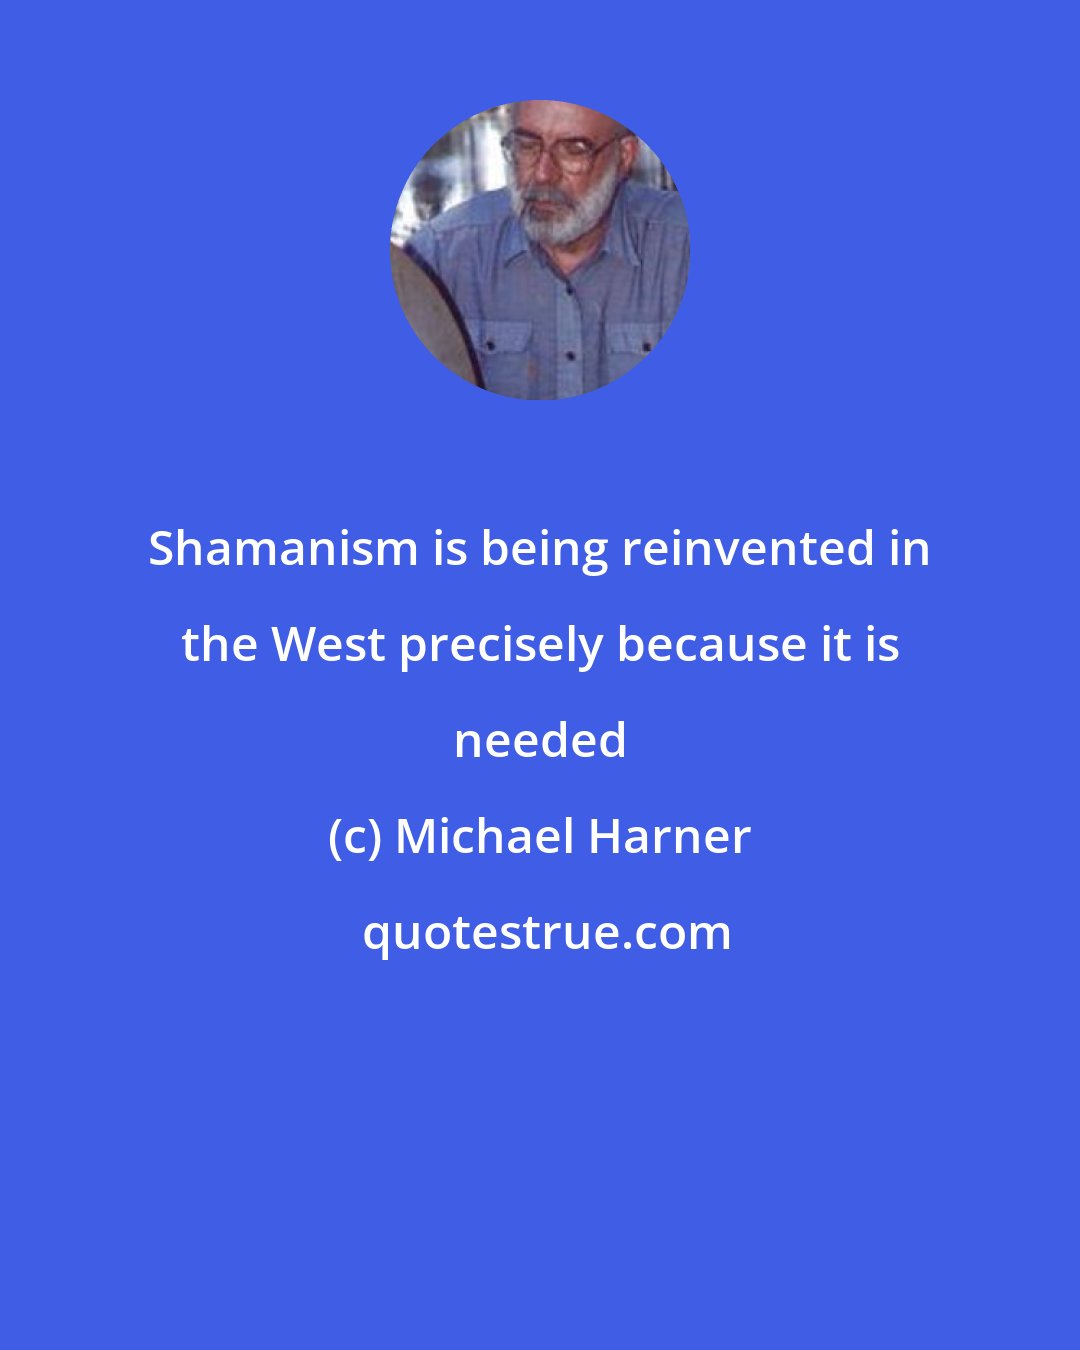 Michael Harner: Shamanism is being reinvented in the West precisely because it is needed